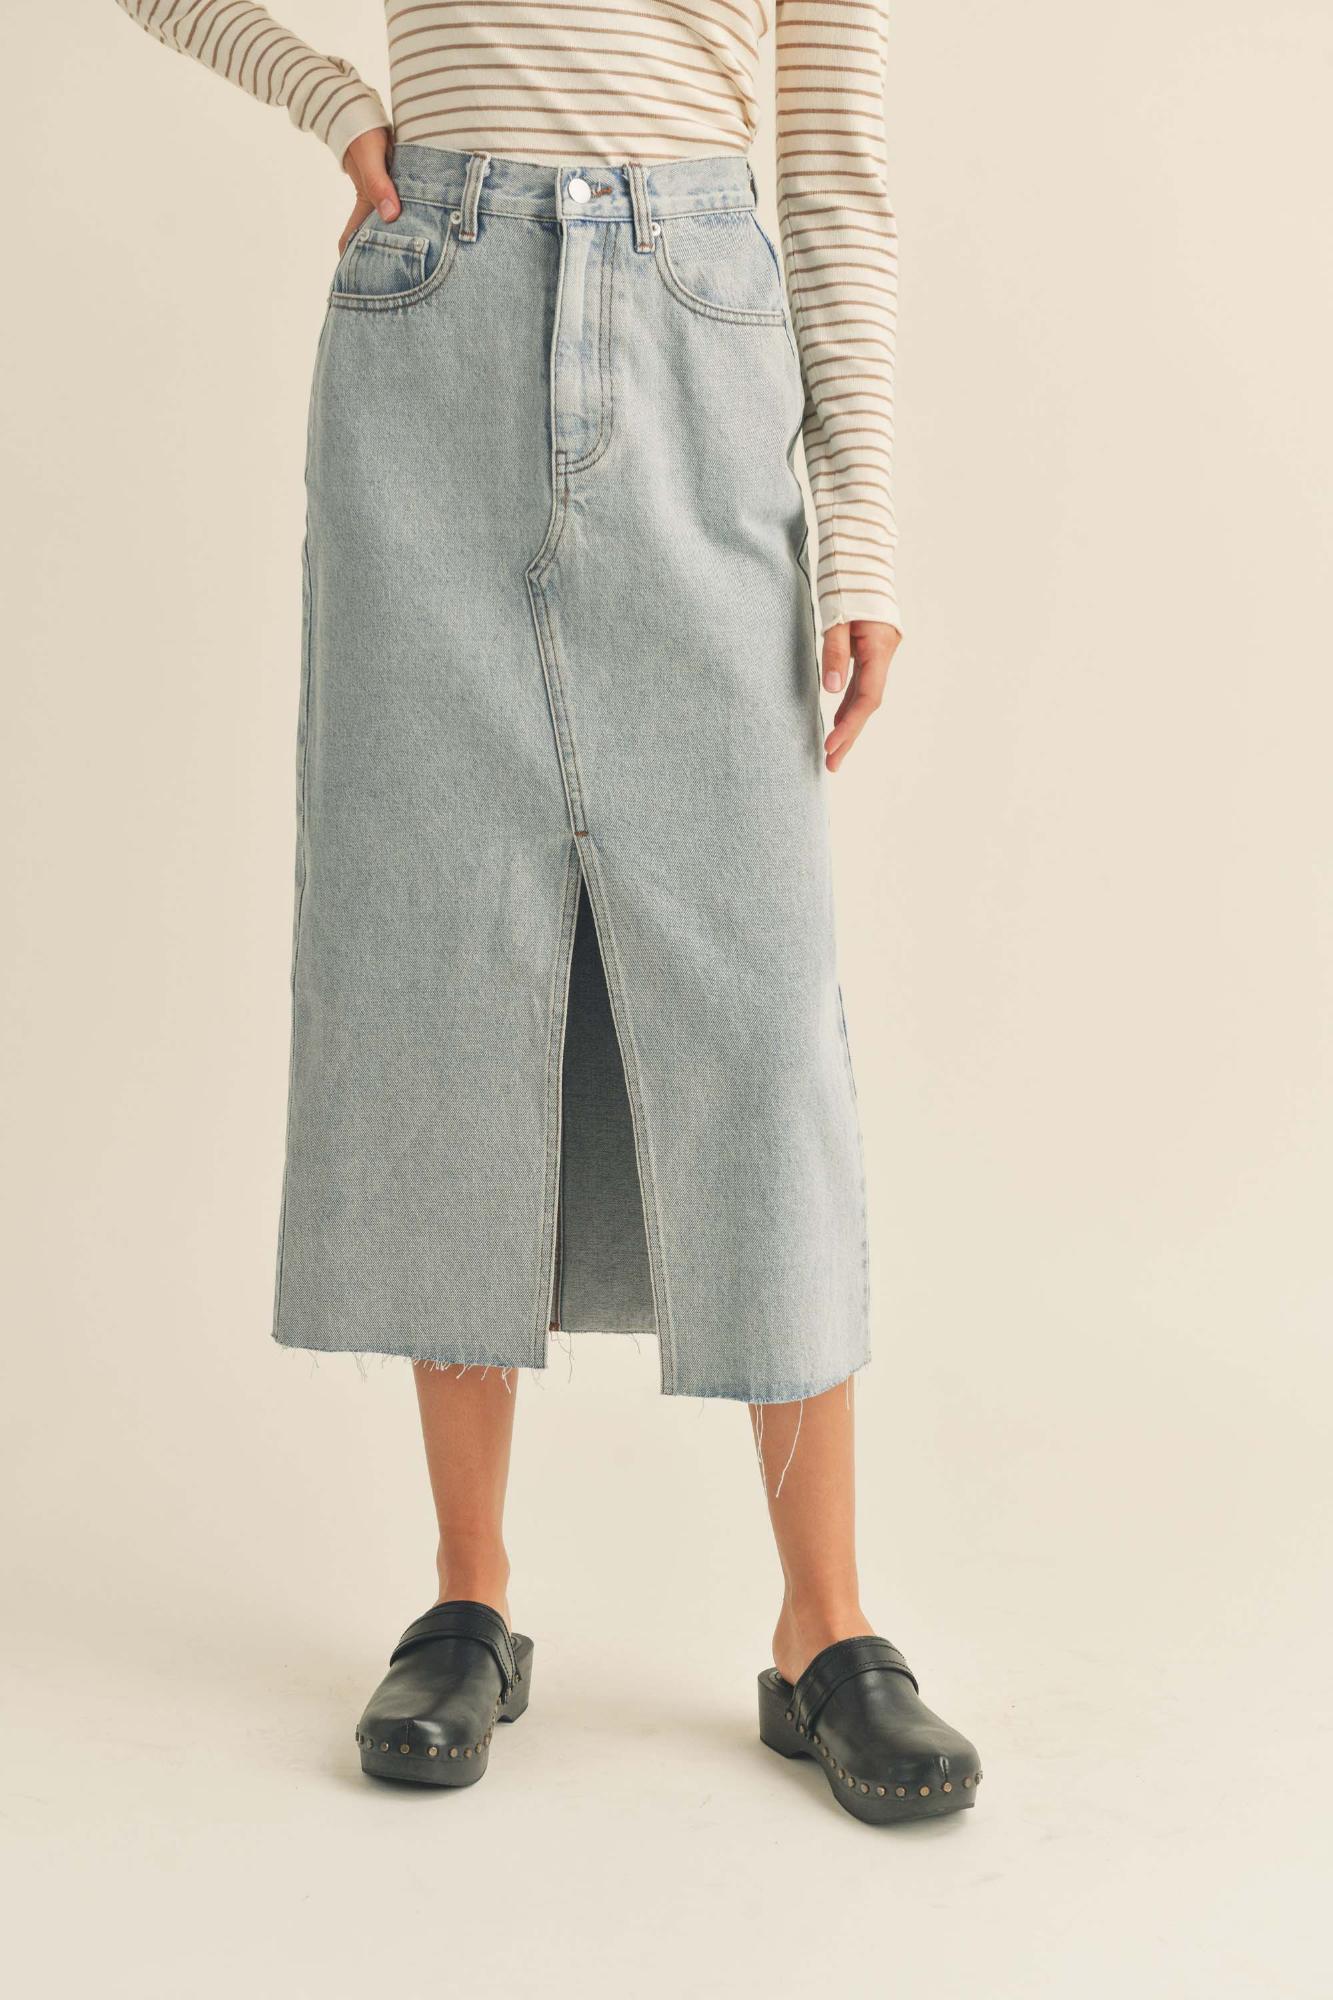 See You Soon Denim Skirt With Slit